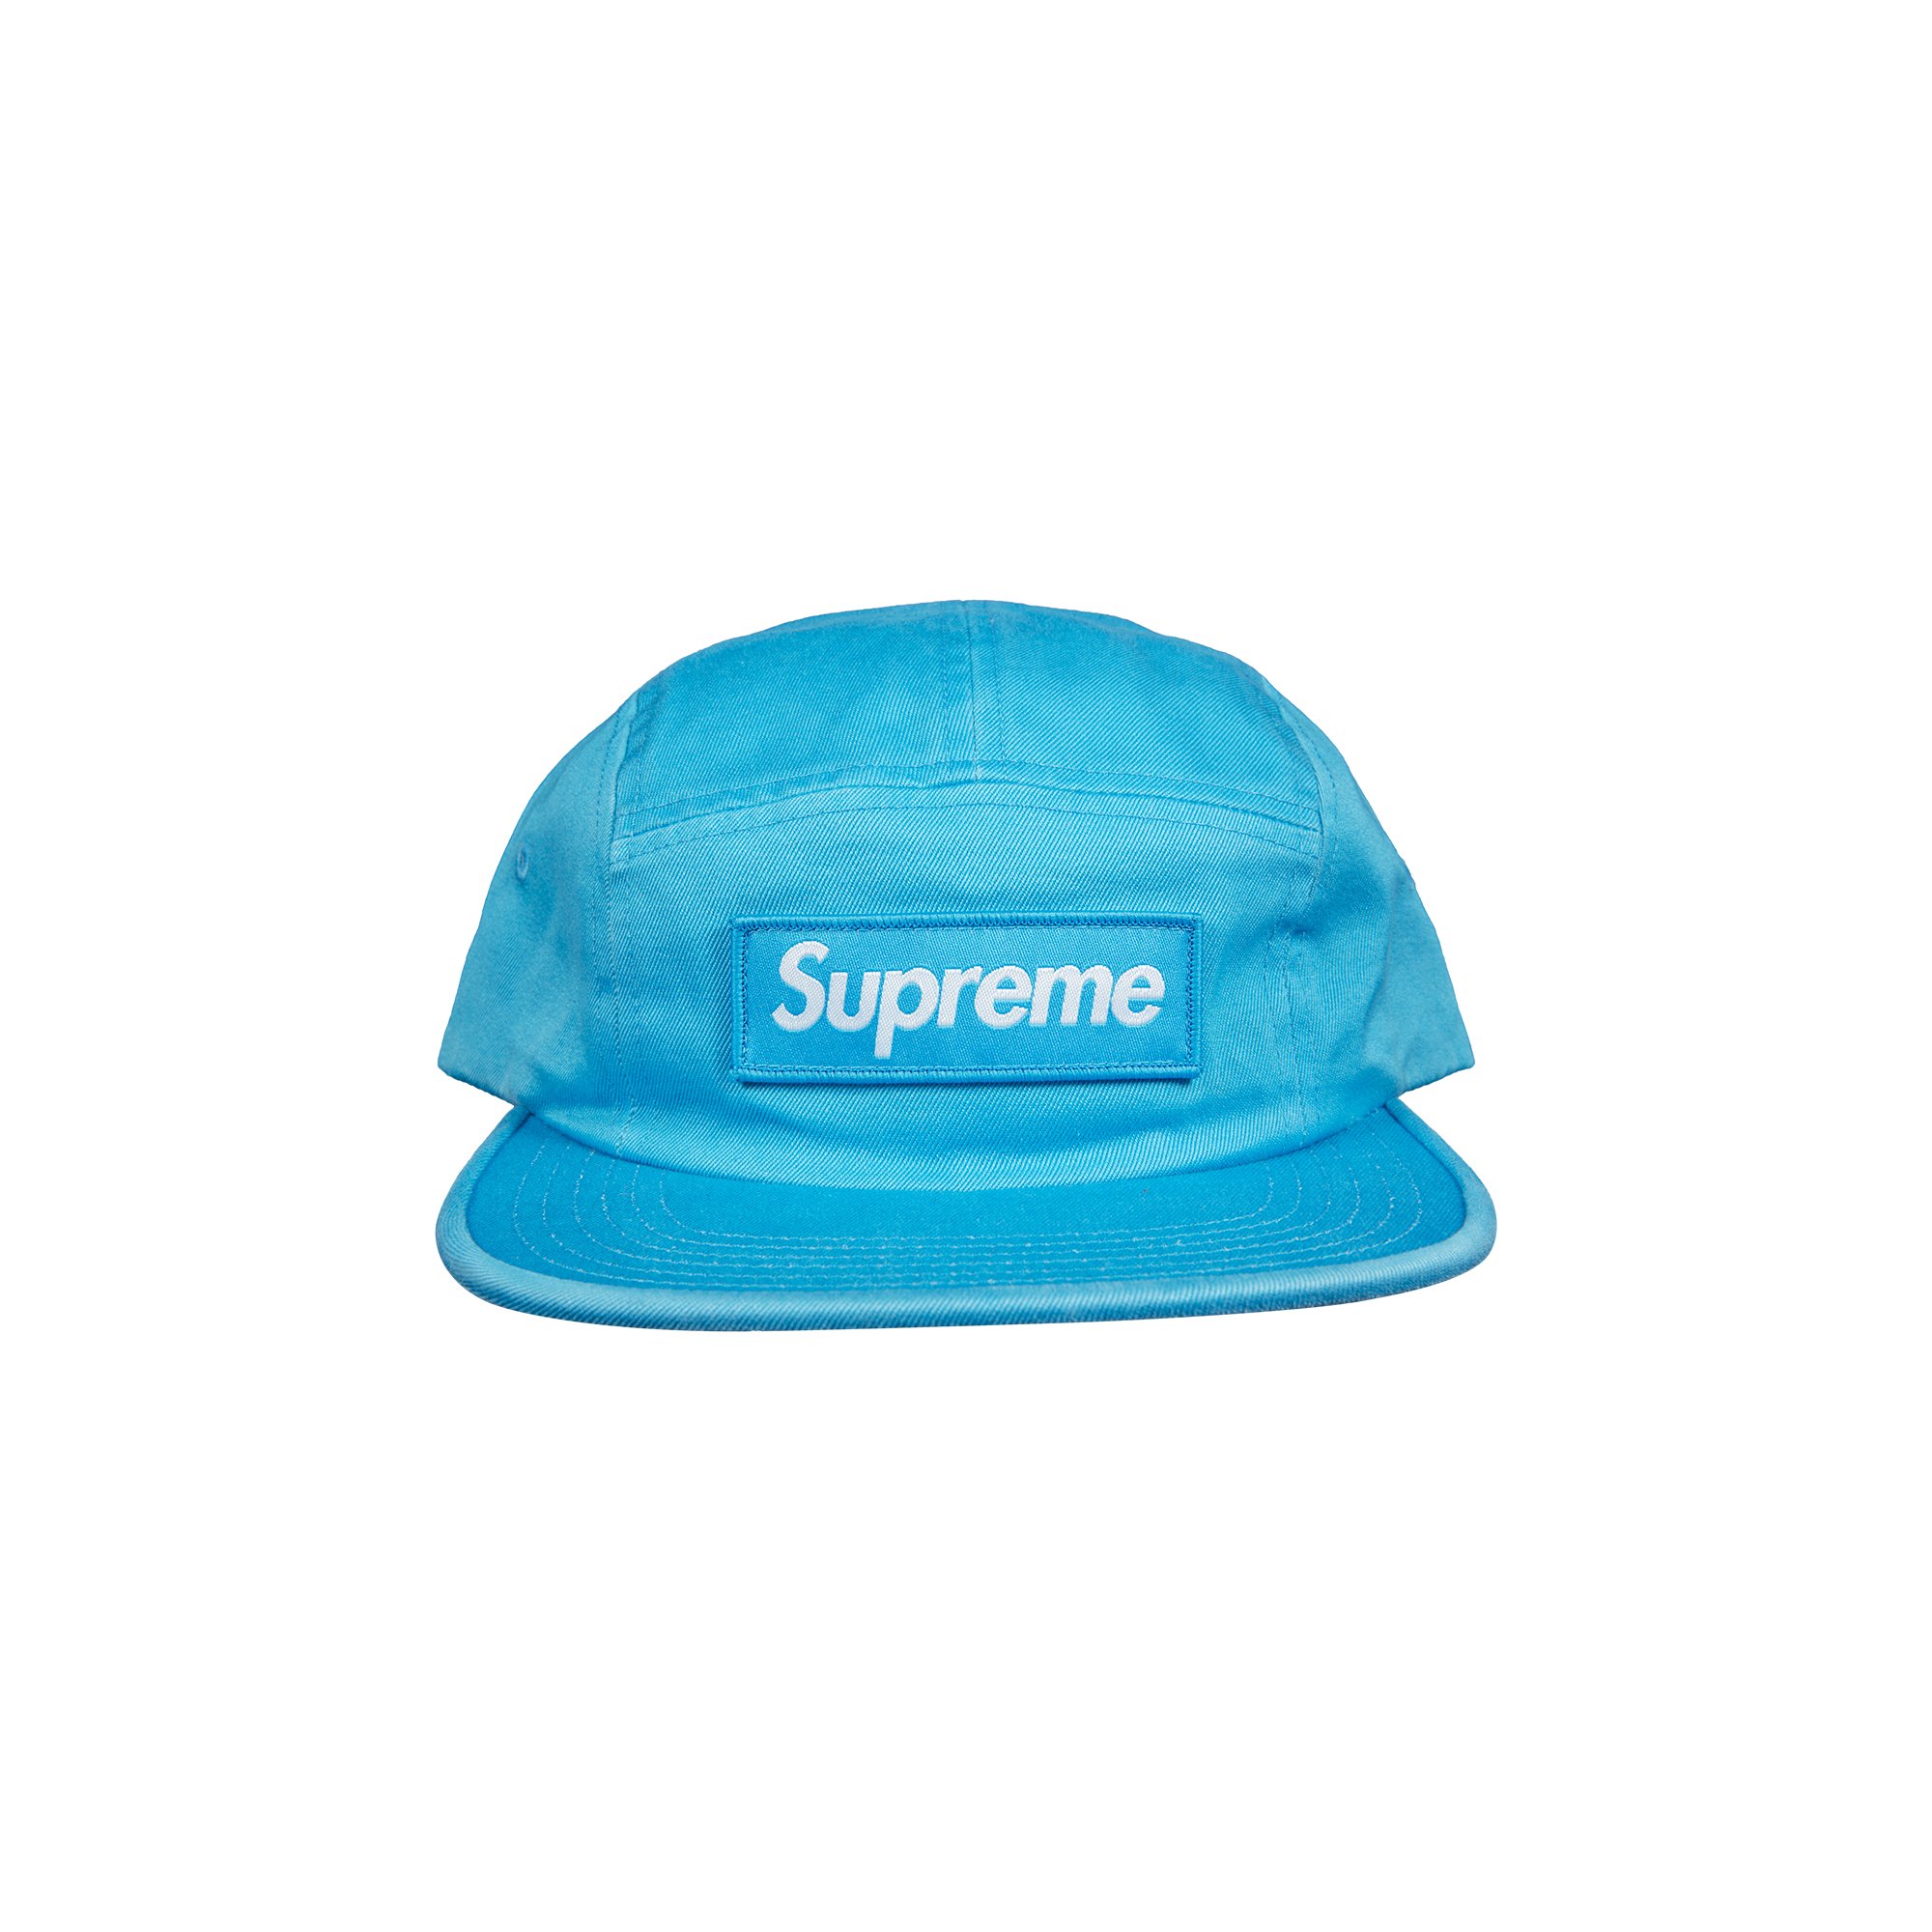 Buy Supreme Washed Chino Twill Camp Cap 'Neon Blue' - FW18H77 NEON 